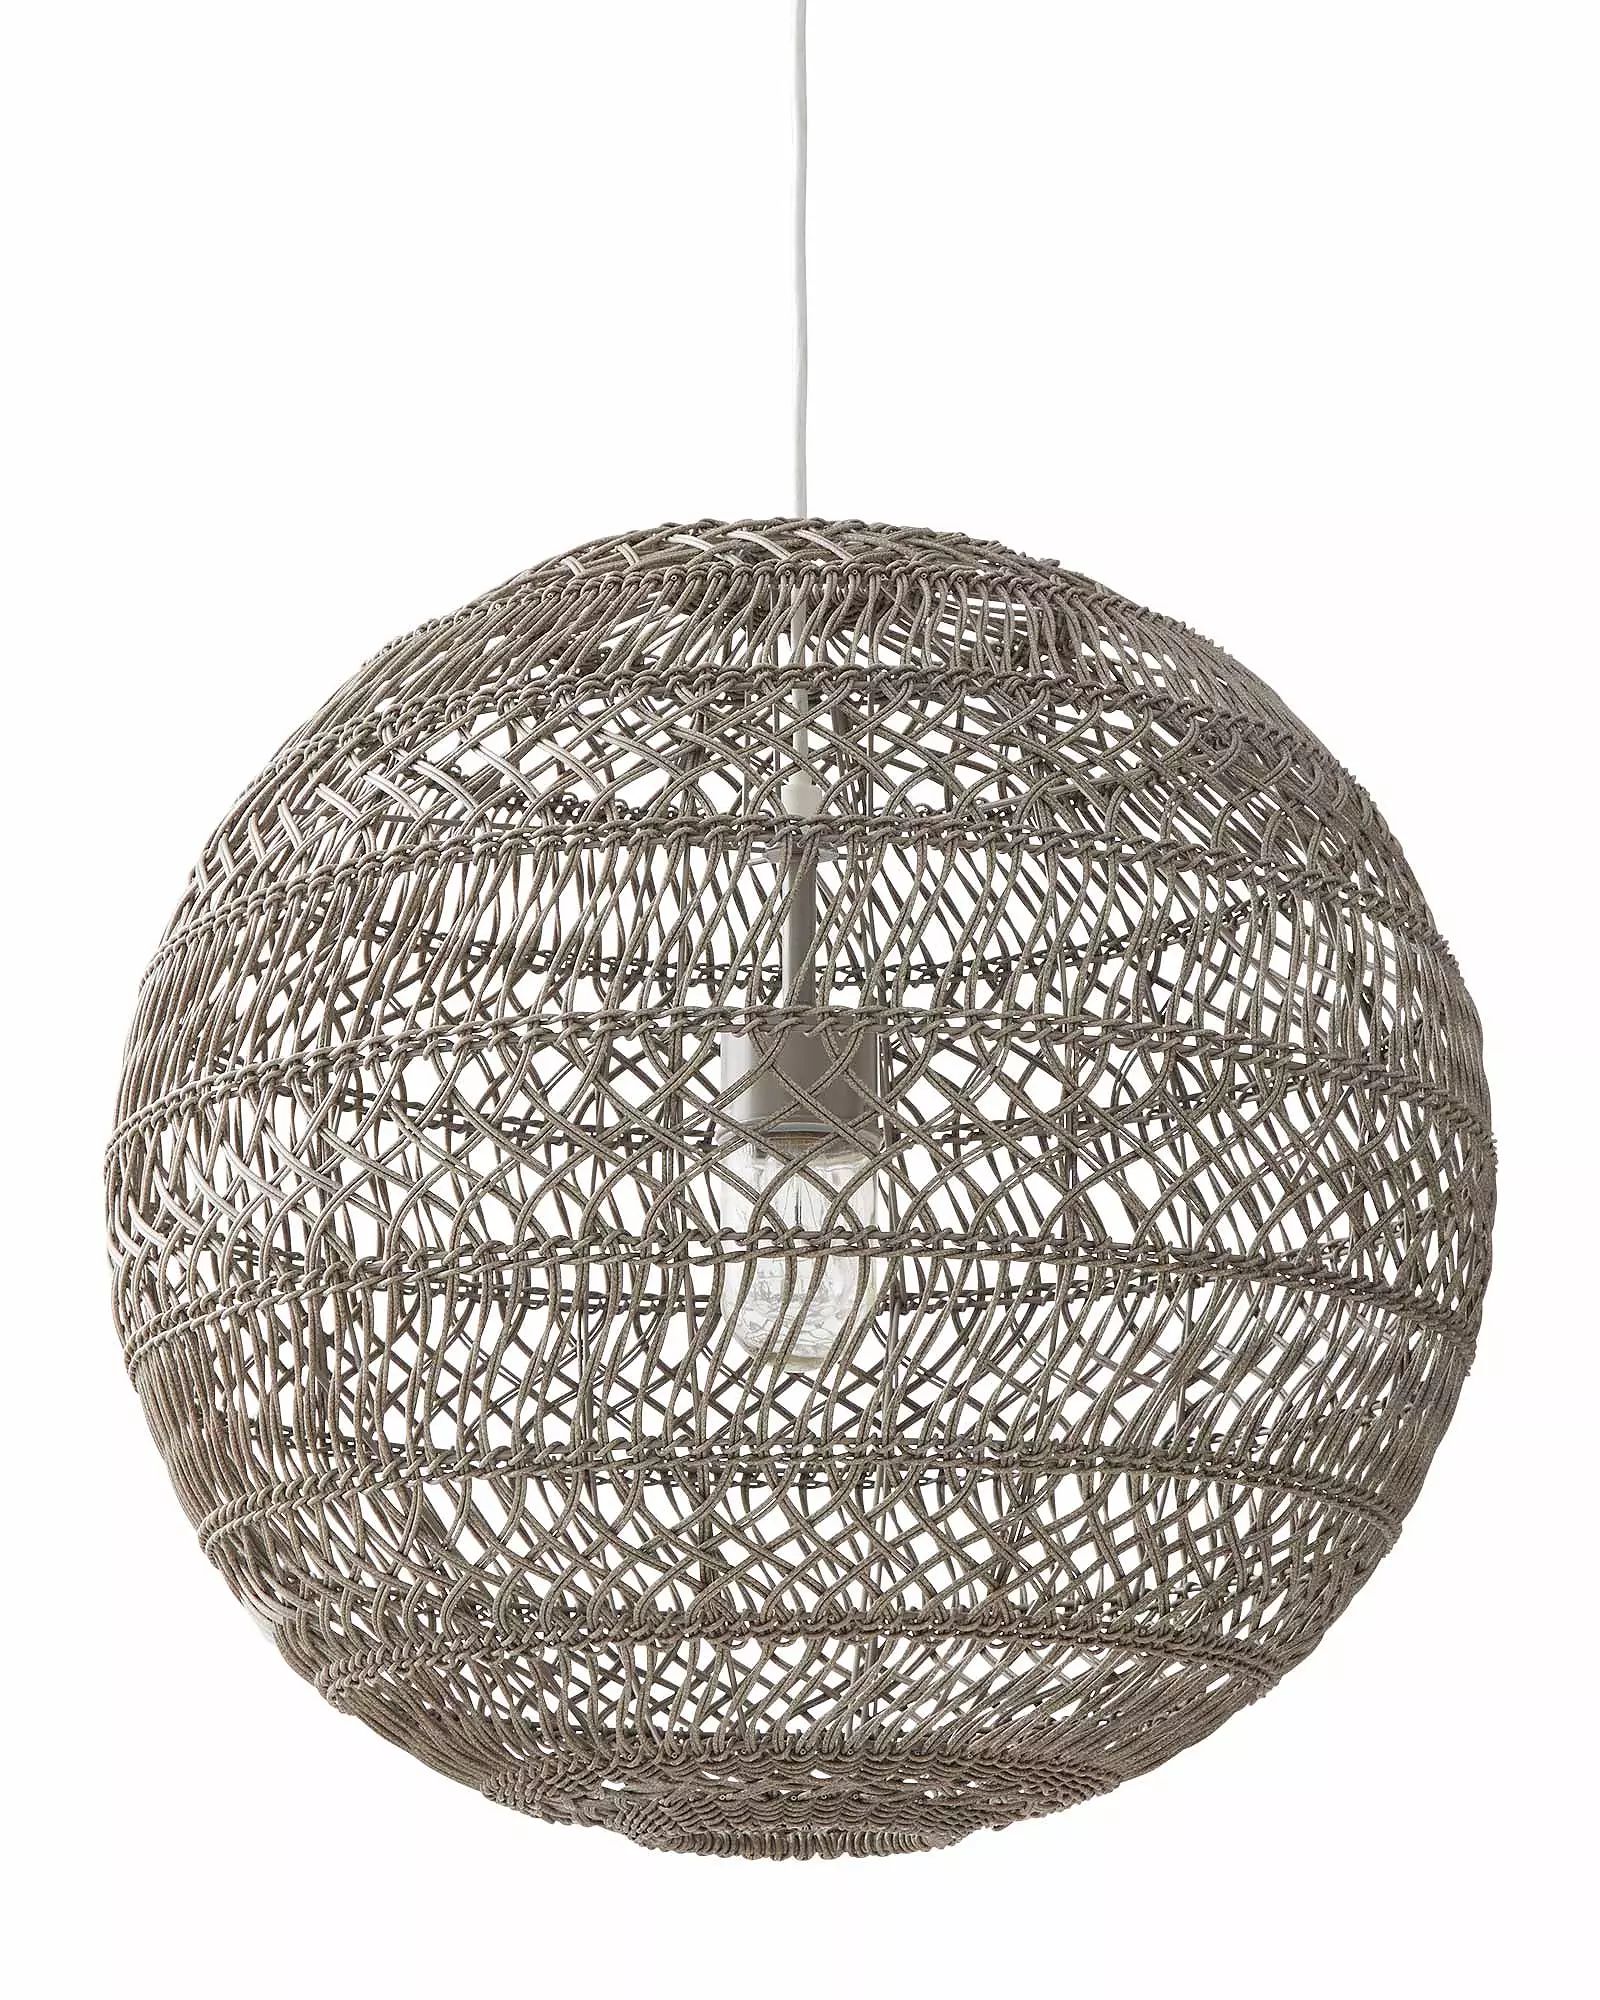 Summerland Outdoor Round Pendant - Harbor Grey | Serena and Lily